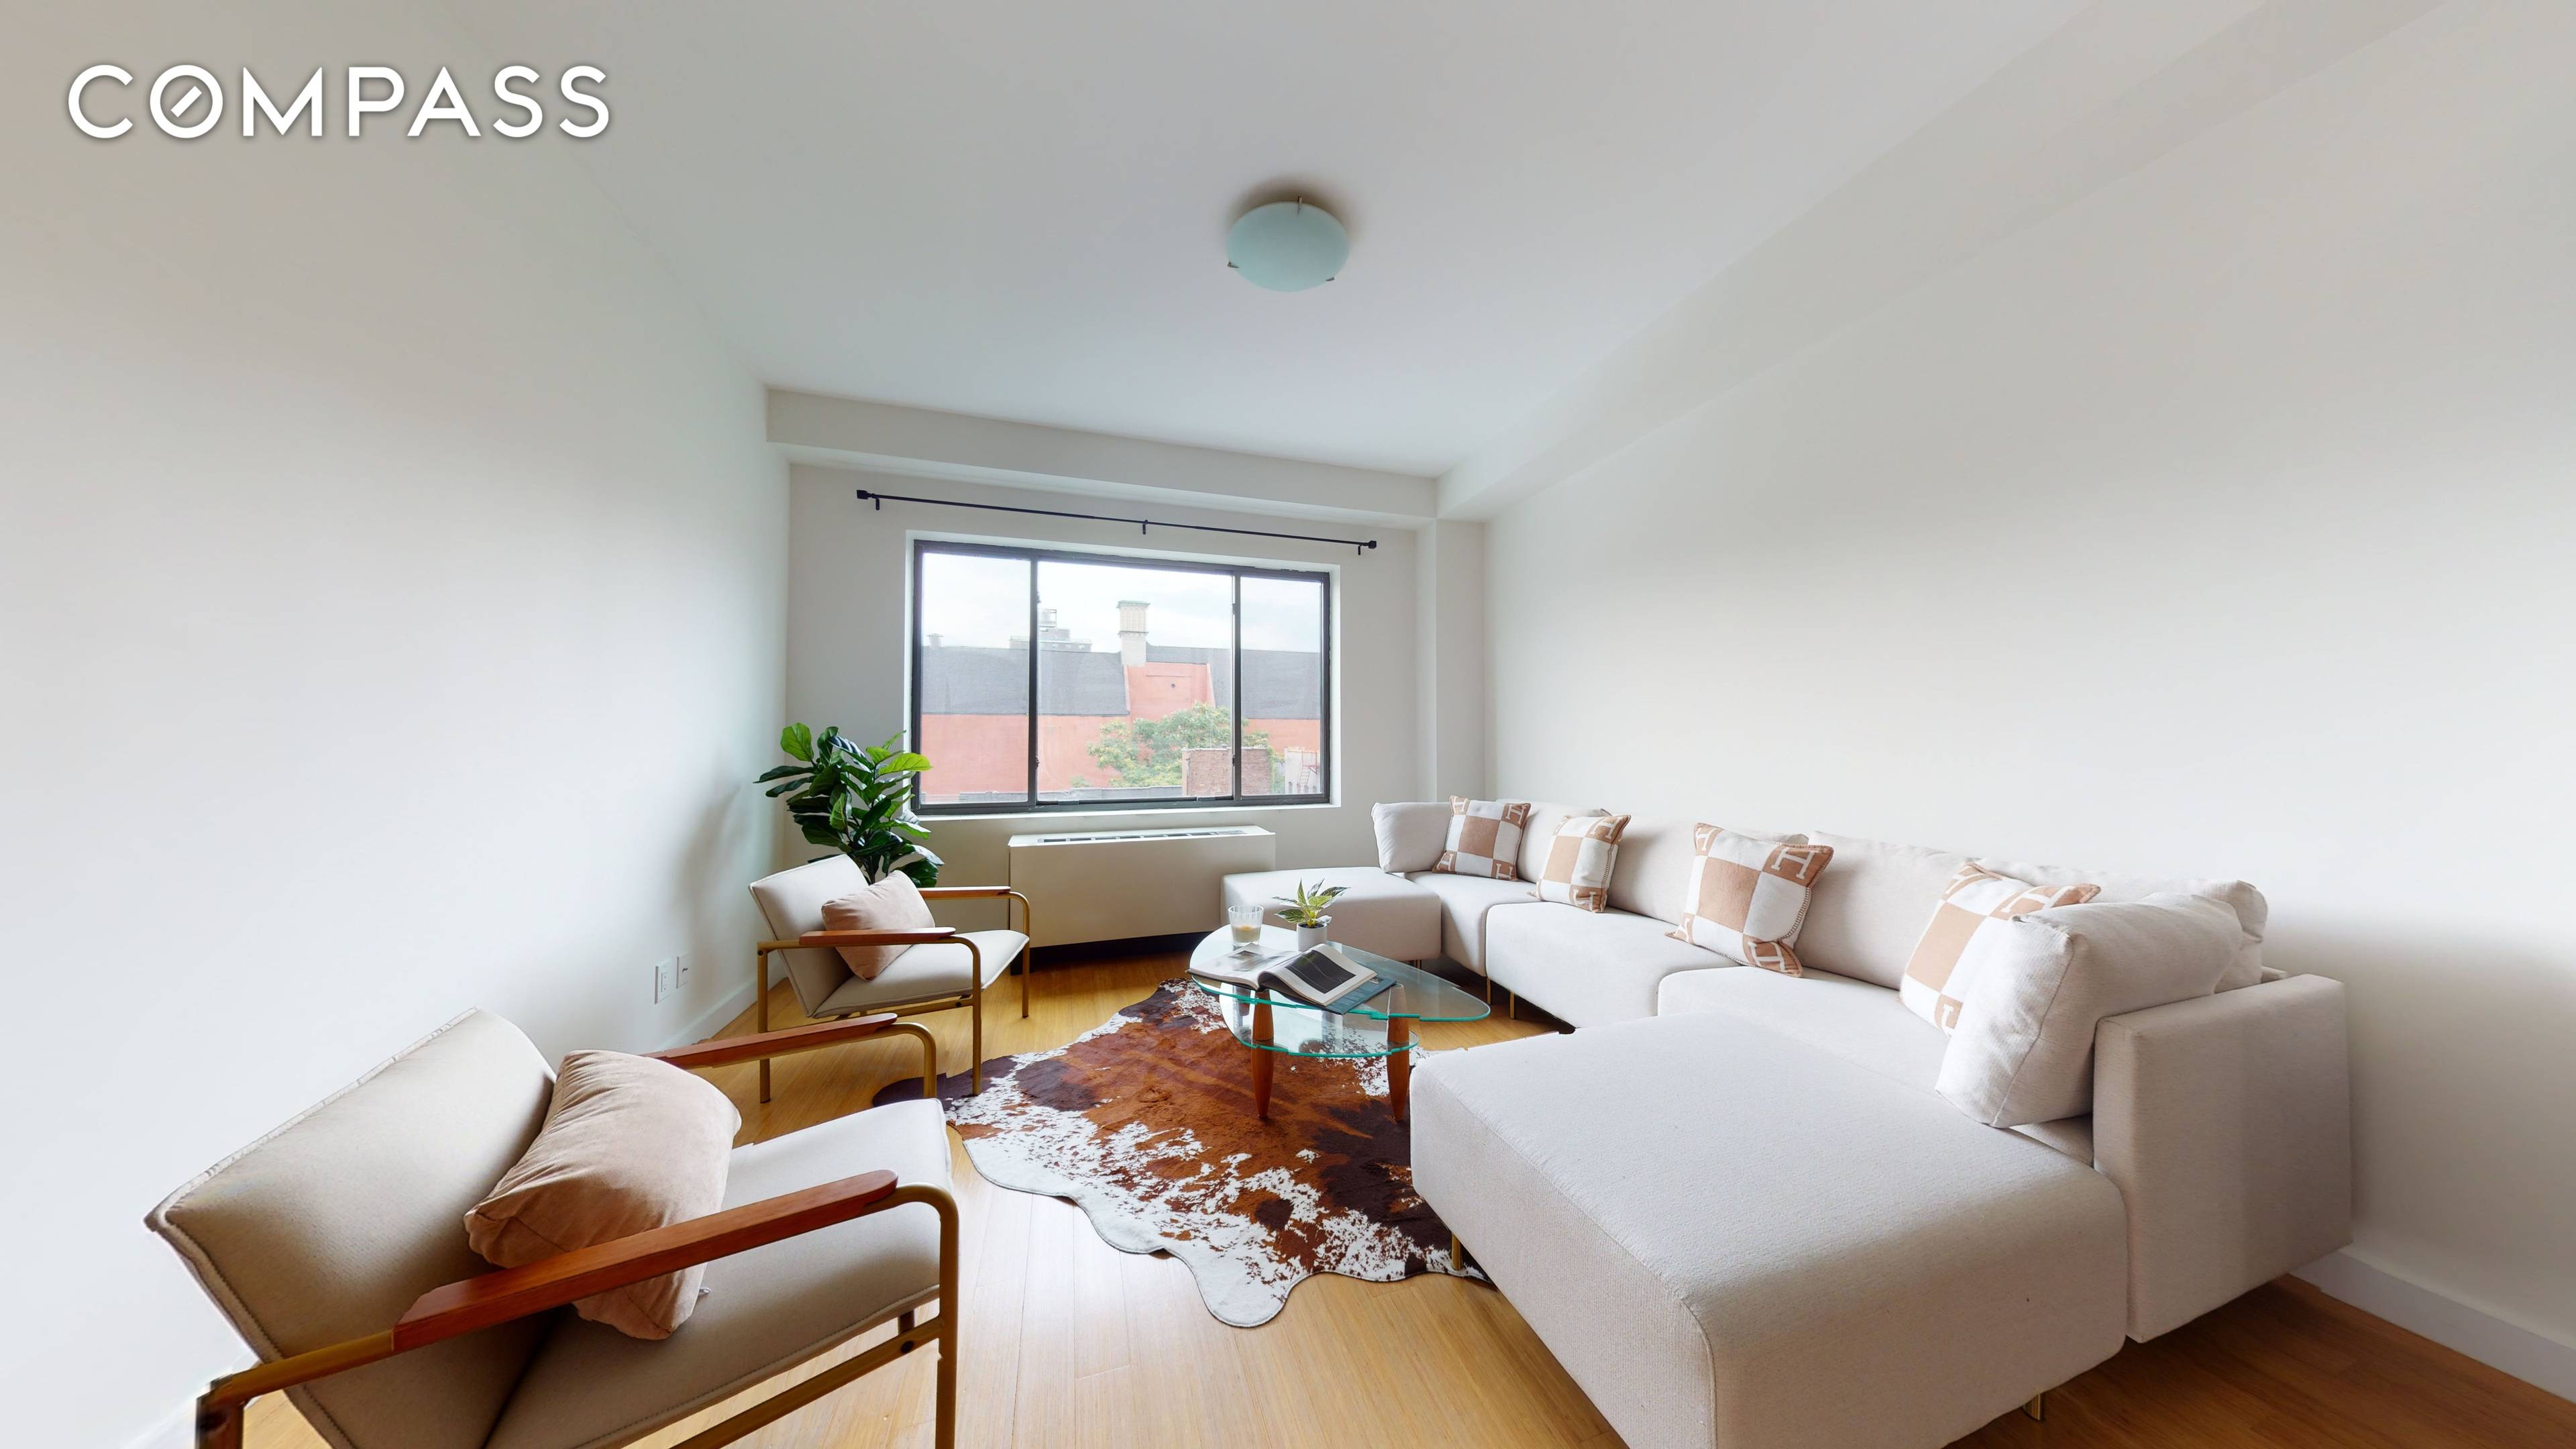 Discover the epitome of convenience and comfort in this exquisite one bedroom apartment.